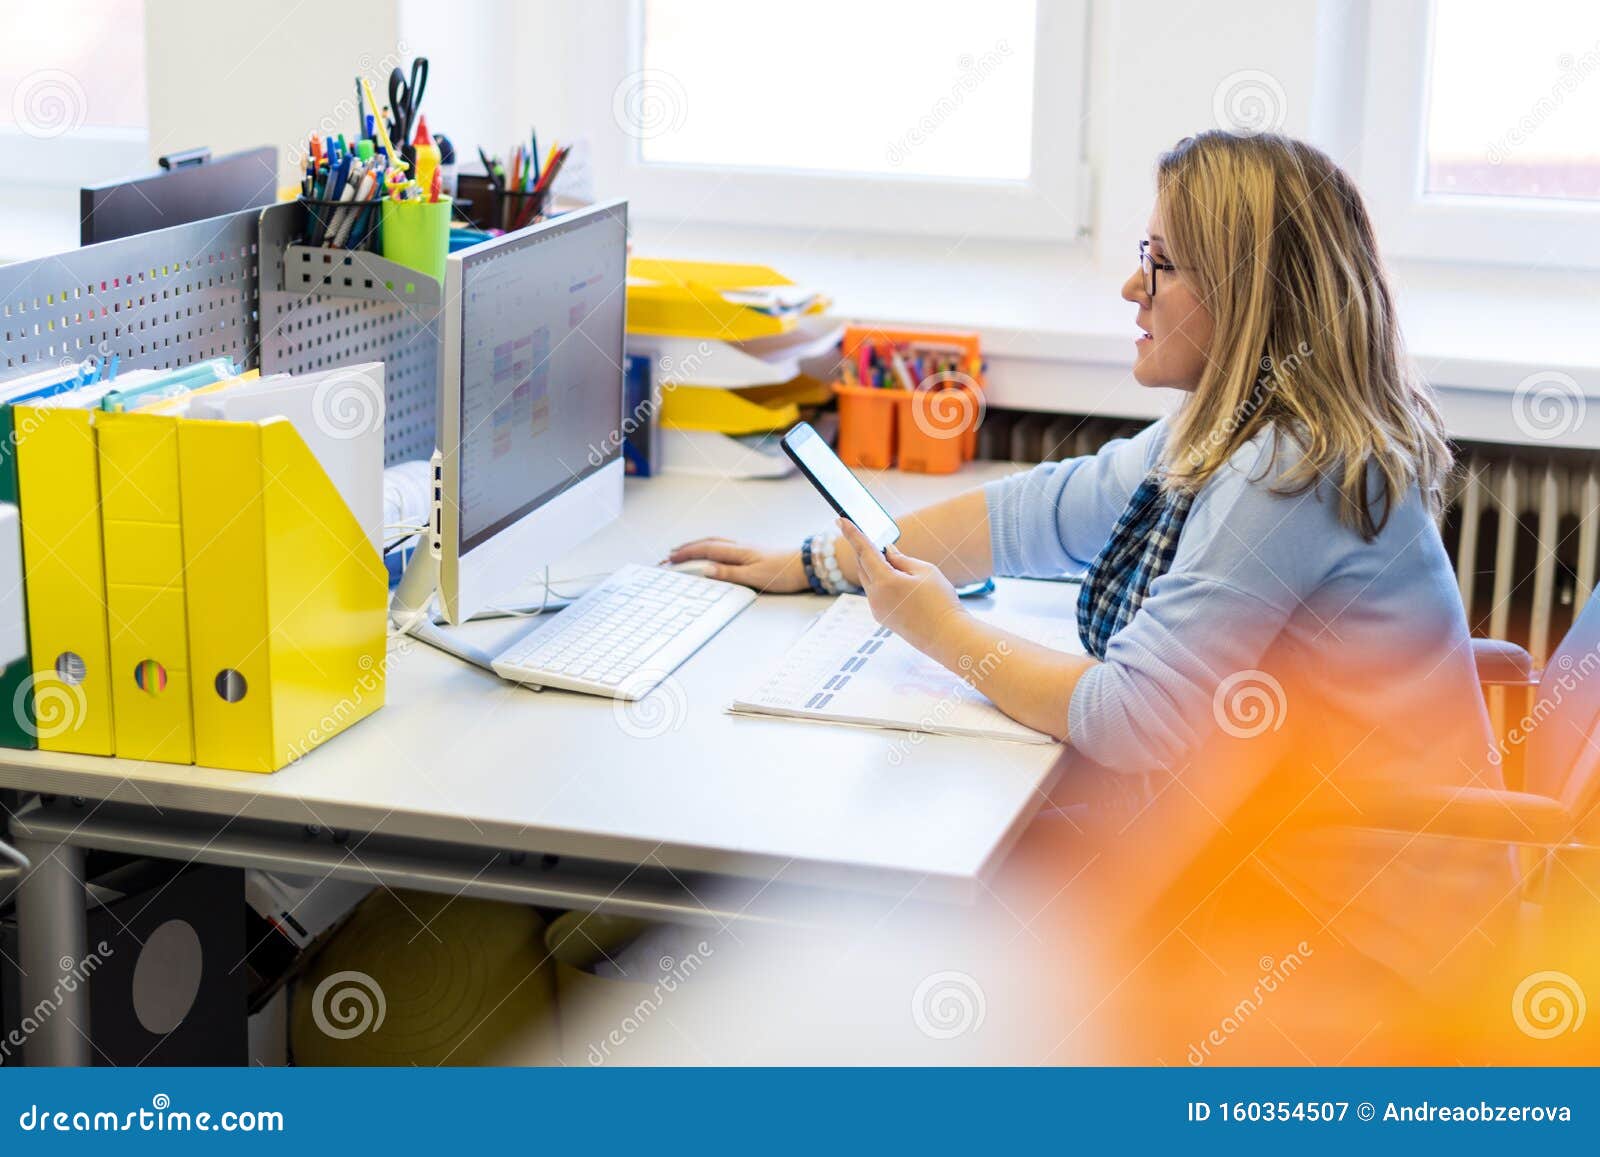 female child therapist in an office during a phone call, using online calendar to schedule patients appointments. calendar planner